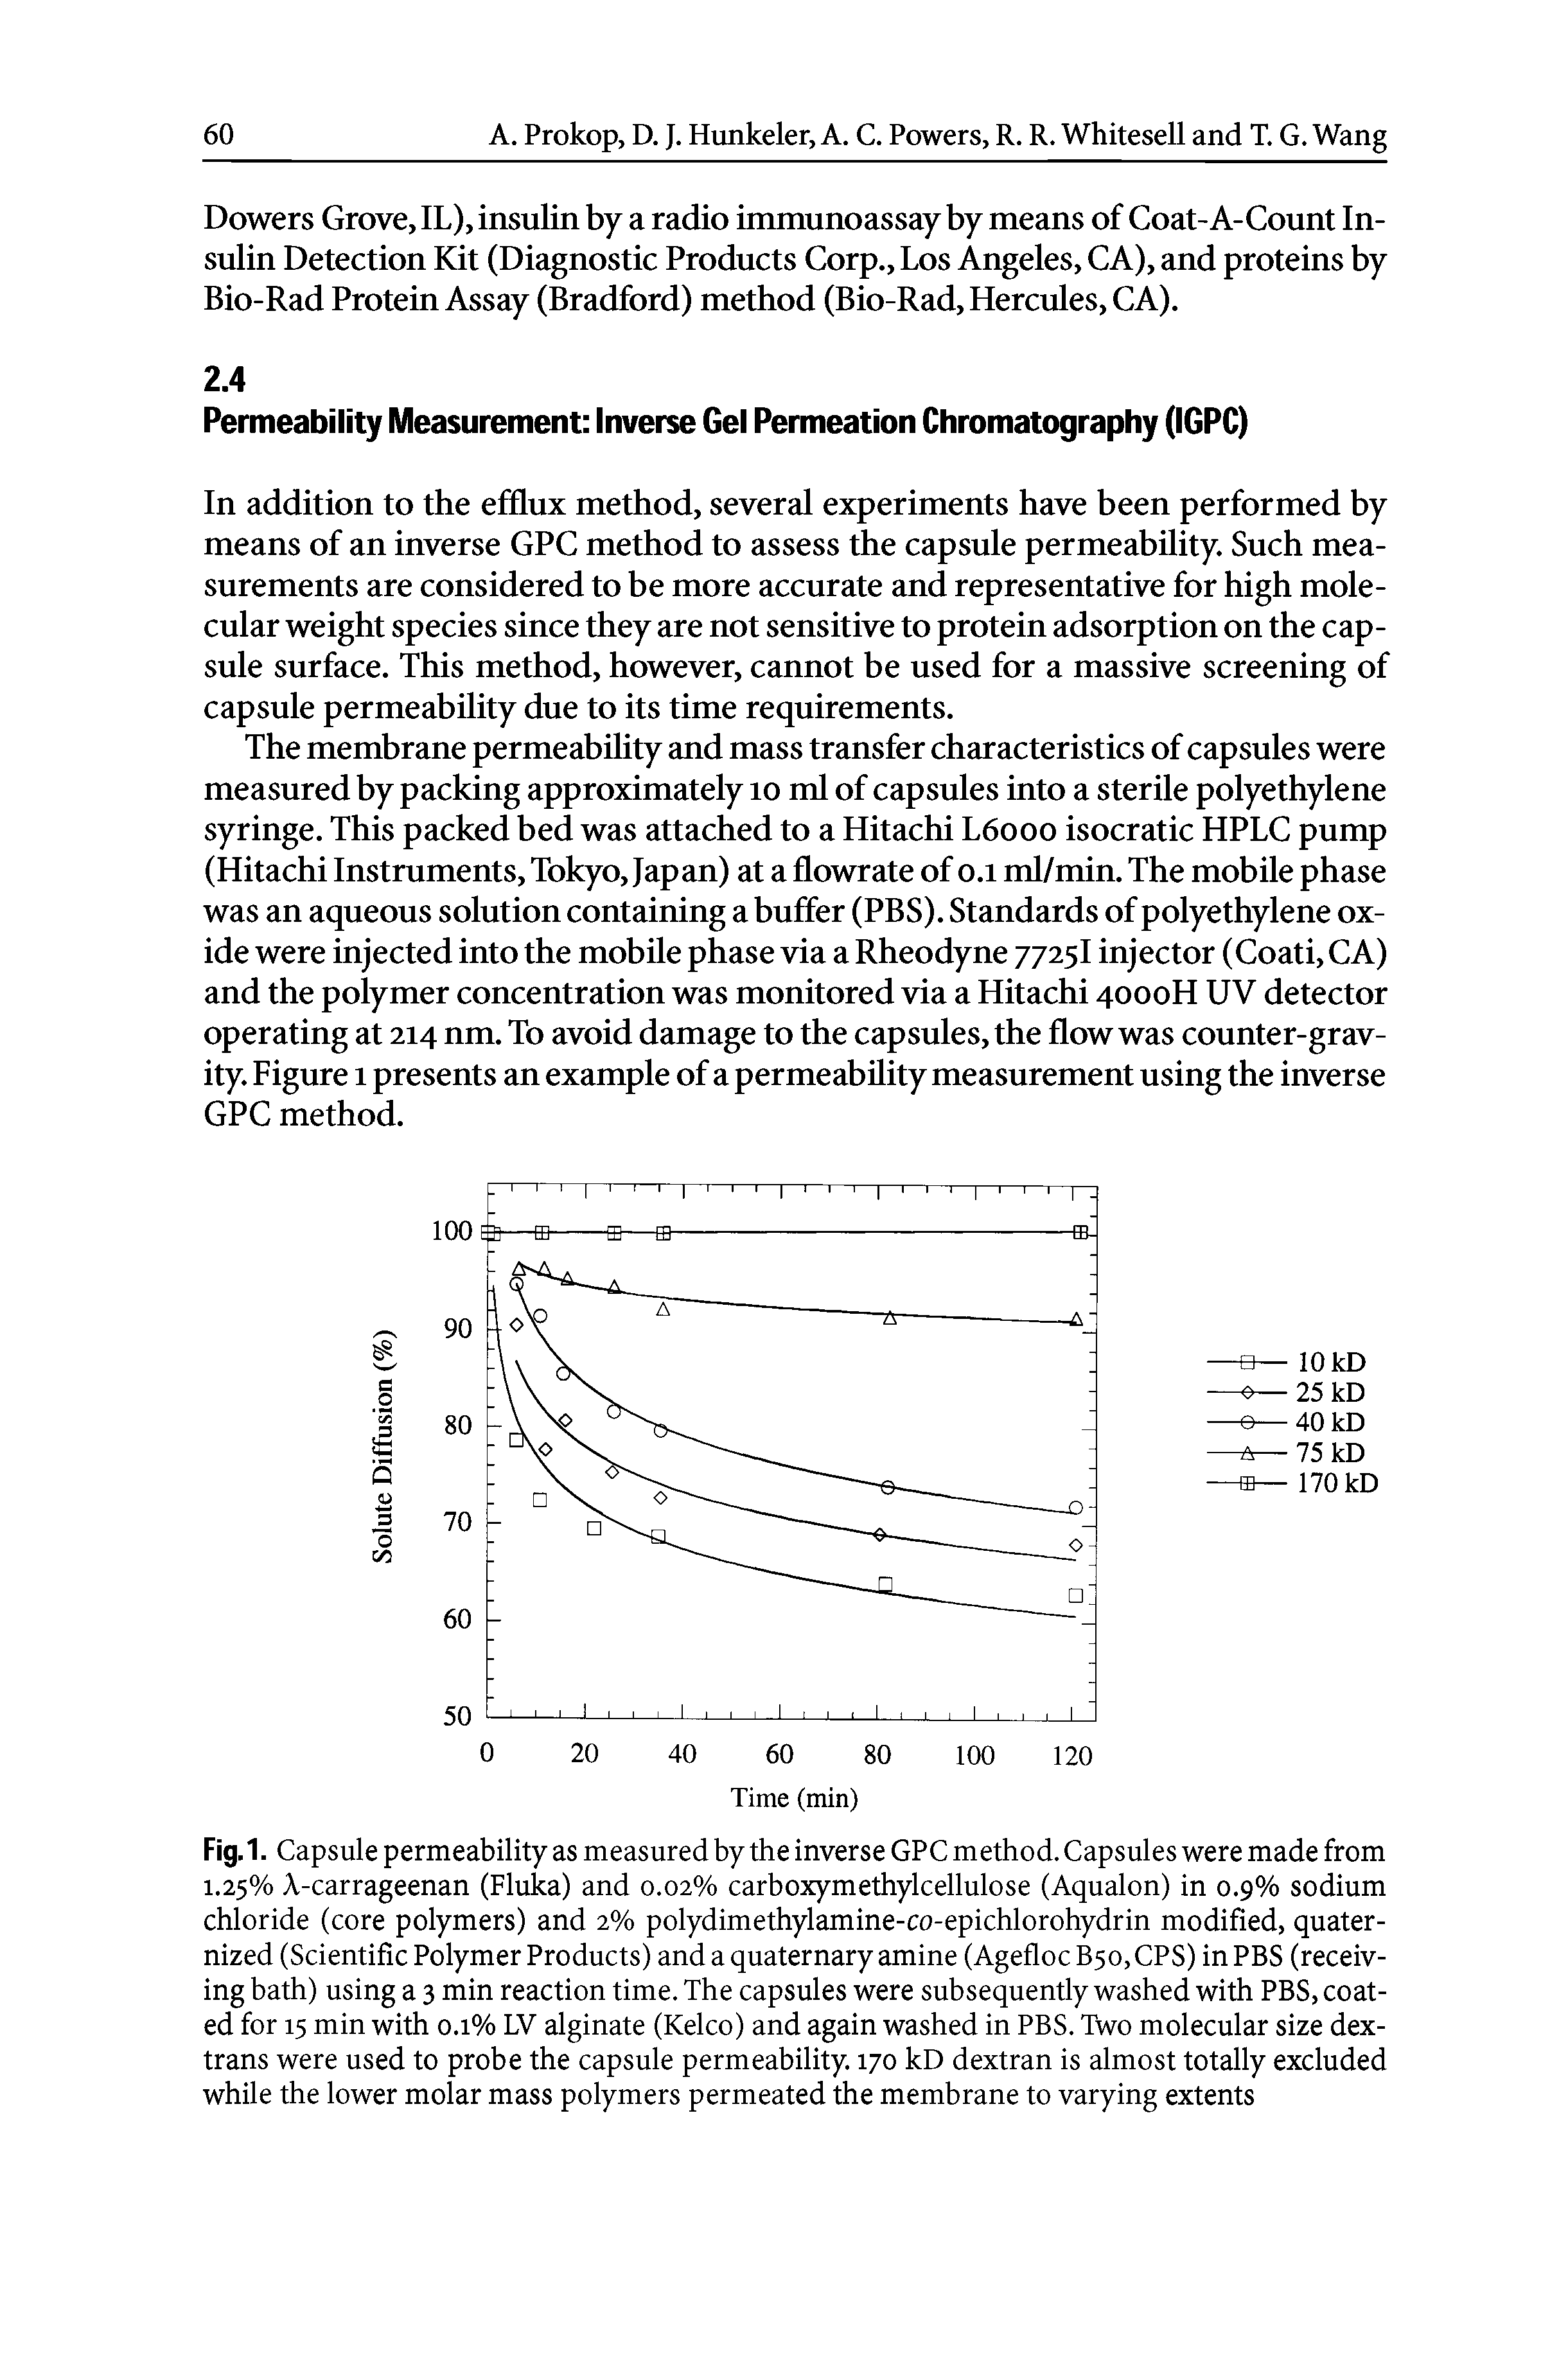 Fig. 1. Capsule permeability as measured by the inverse GPC method. Capsules were made from 1.25% A-carrageenan (Fluka) and 0.02% carboxymethylcellulose (Aqualon) in 0.9% sodium chloride (core polymers) and 2% polydimethylamine-co-epichlorohydrin modified, quater-nized (Scientific Polymer Products) and a quaternary amine (Agefloc B50, CPS) in PBS (receiving bath) using a 3 min reaction time. The capsules were subsequently washed with PBS, coated for 15 min with 0.1% LV alginate (Kelco) and again washed in PBS. Two molecular size dex-trans were used to probe the capsule permeability. 170 kD dextran is almost totally excluded while the lower molar mass polymers permeated the membrane to varying extents...